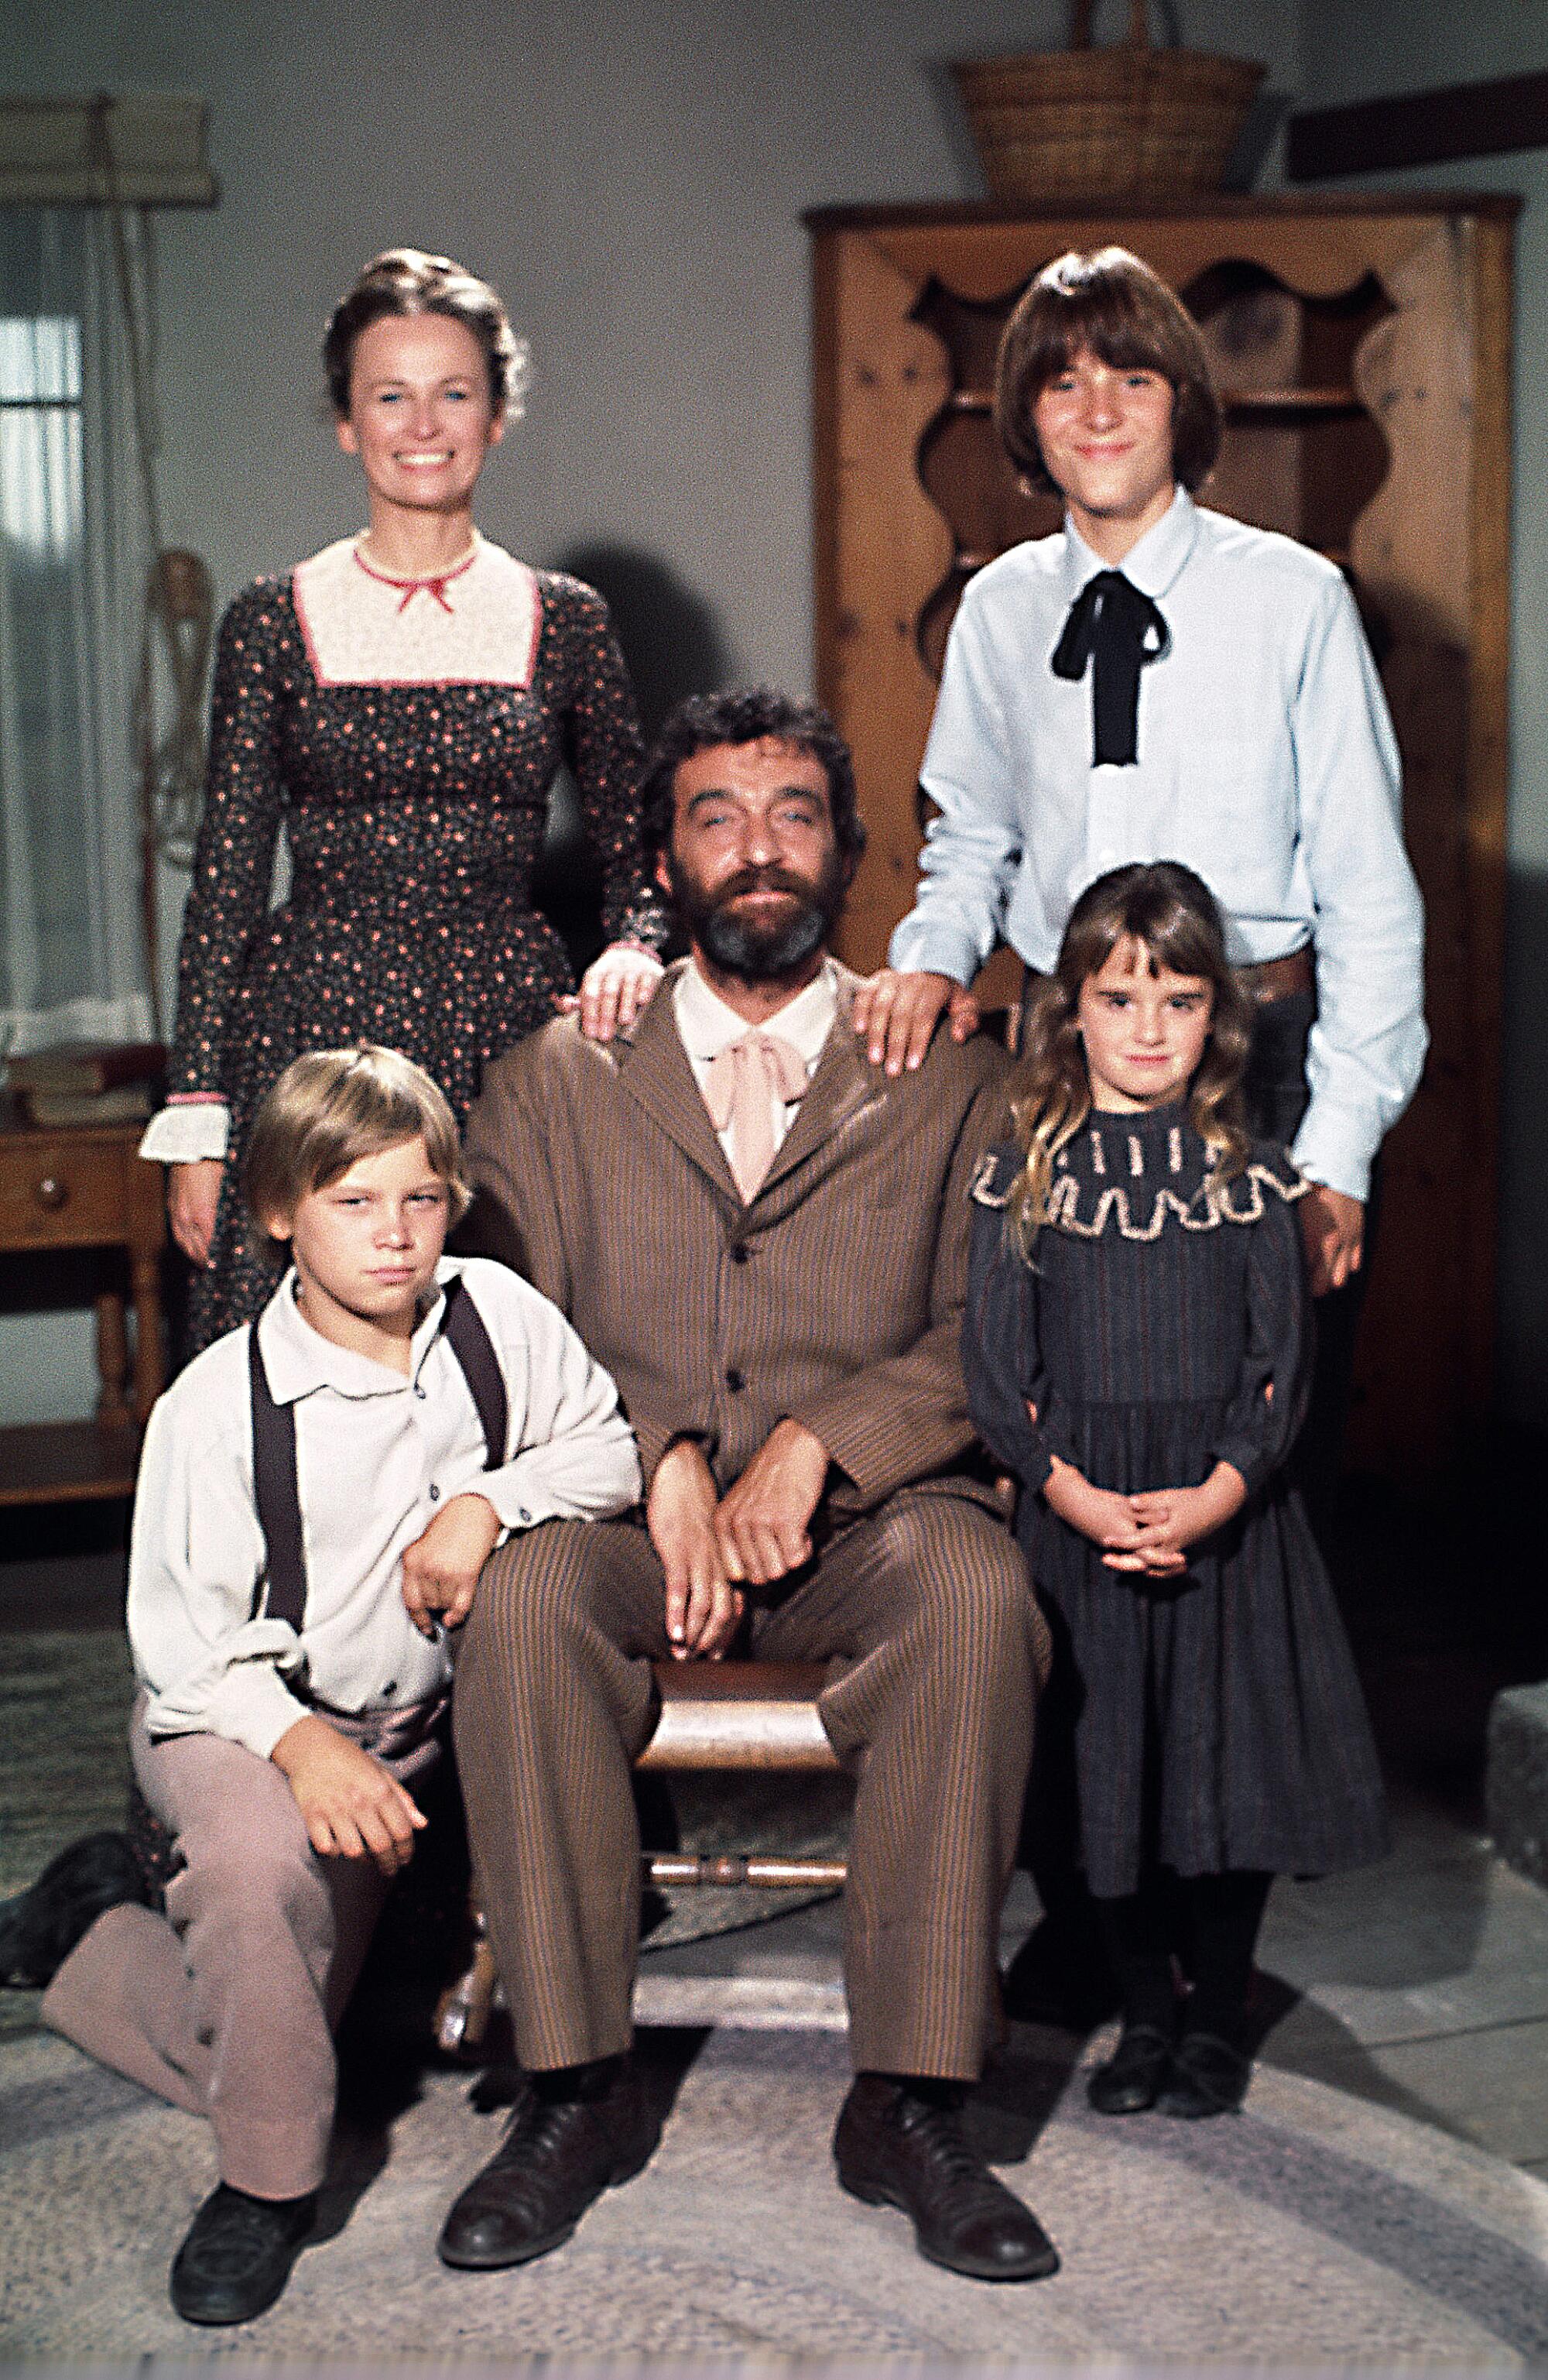 Kyle Richards, bottom right, with co-stars on "Little House on the Prairie" in 1975.